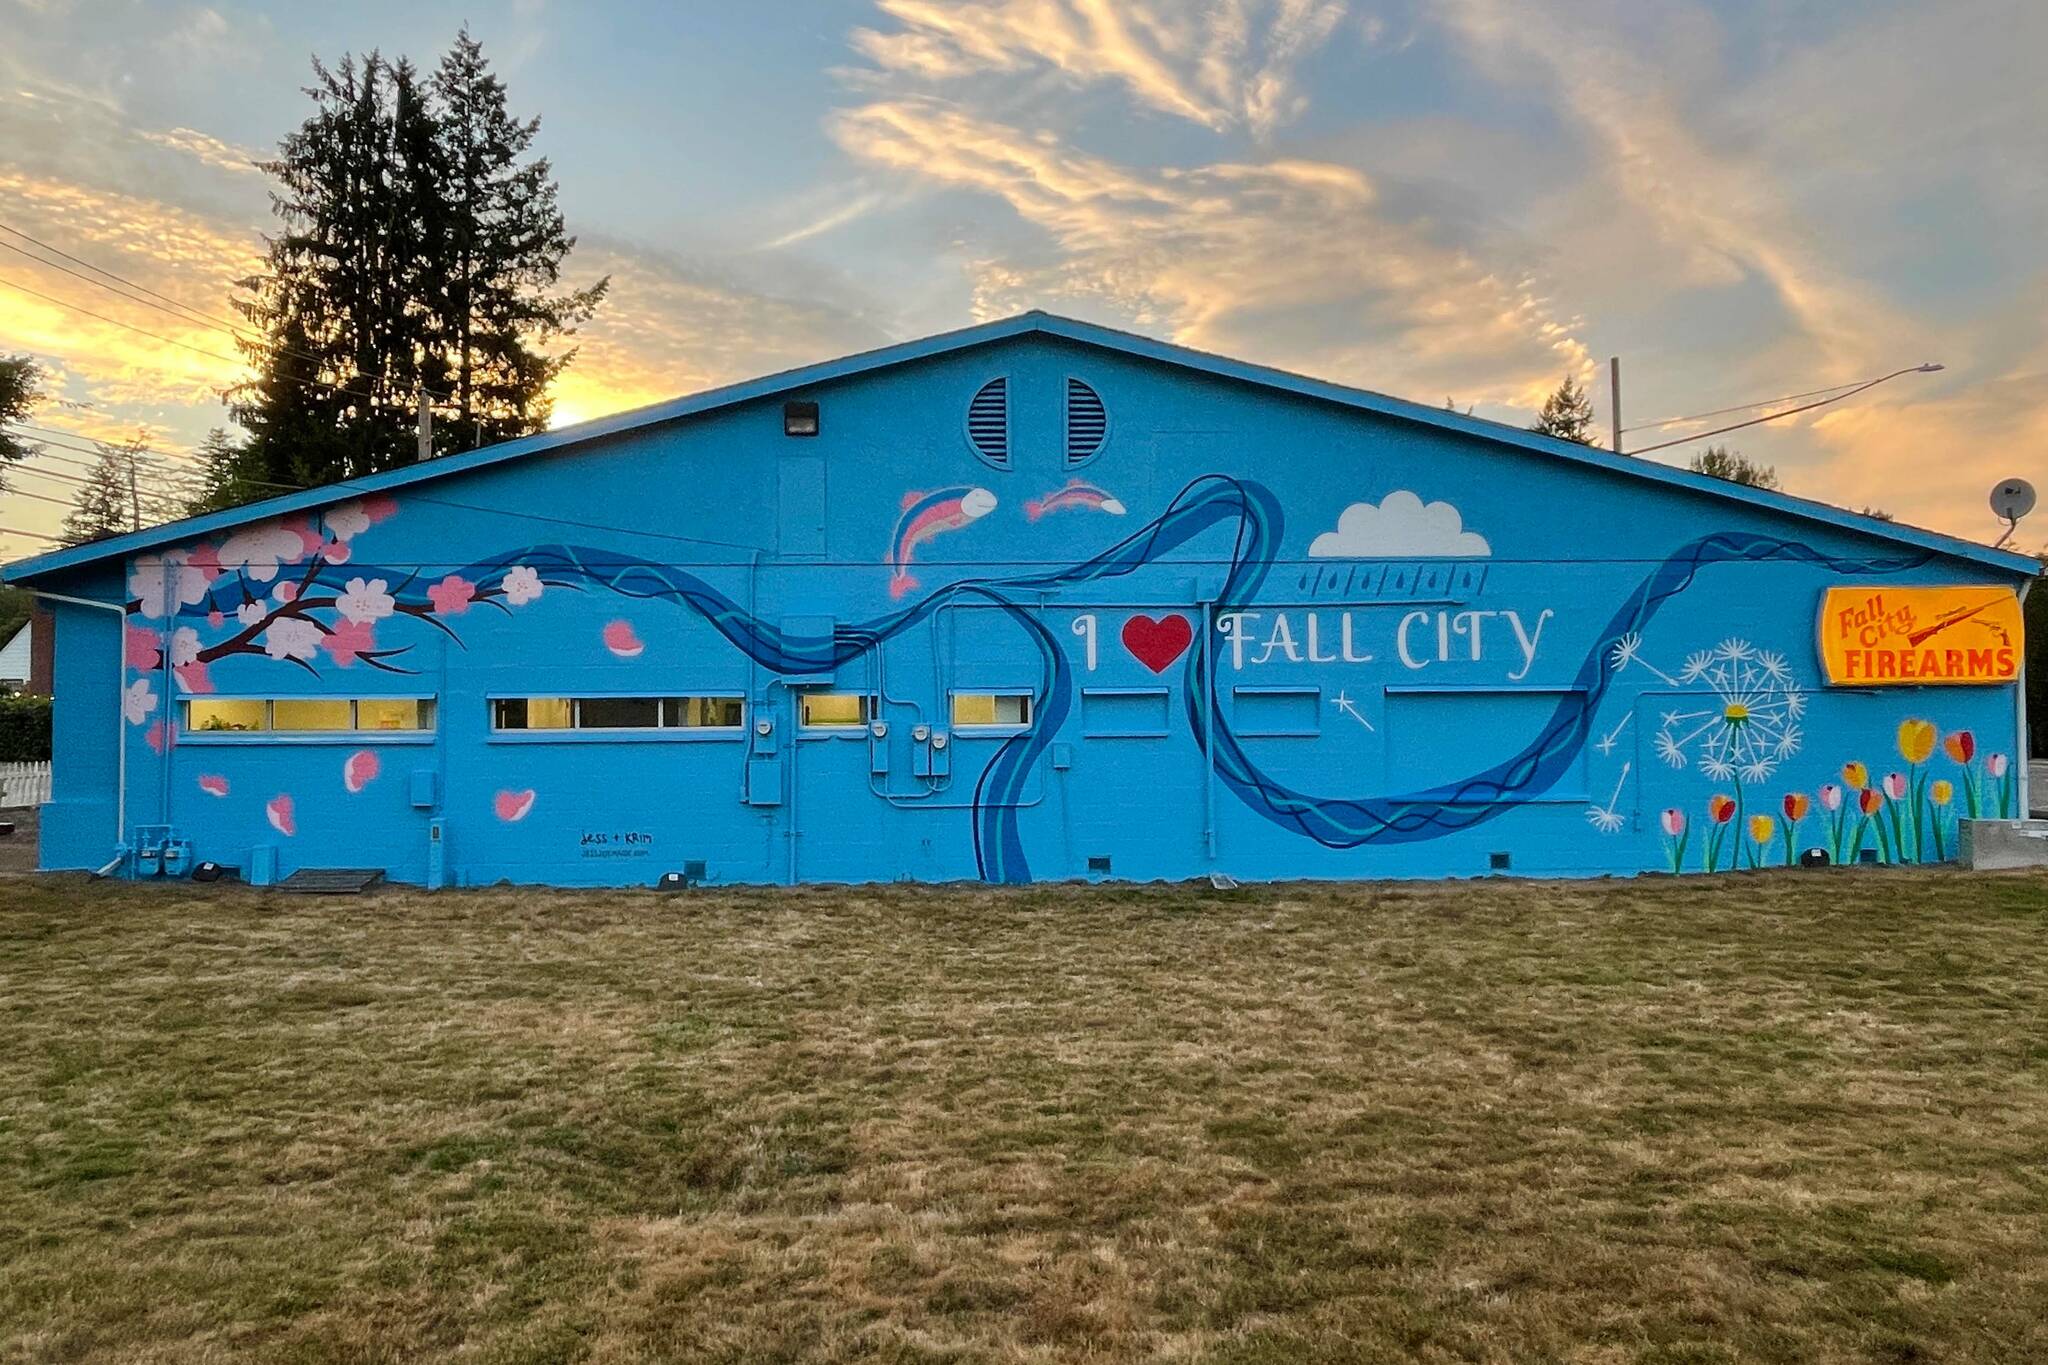 Photo courtesy of Krimsey Lilleth.
A newly painted mural on the Fall City Firearms building at sunset.